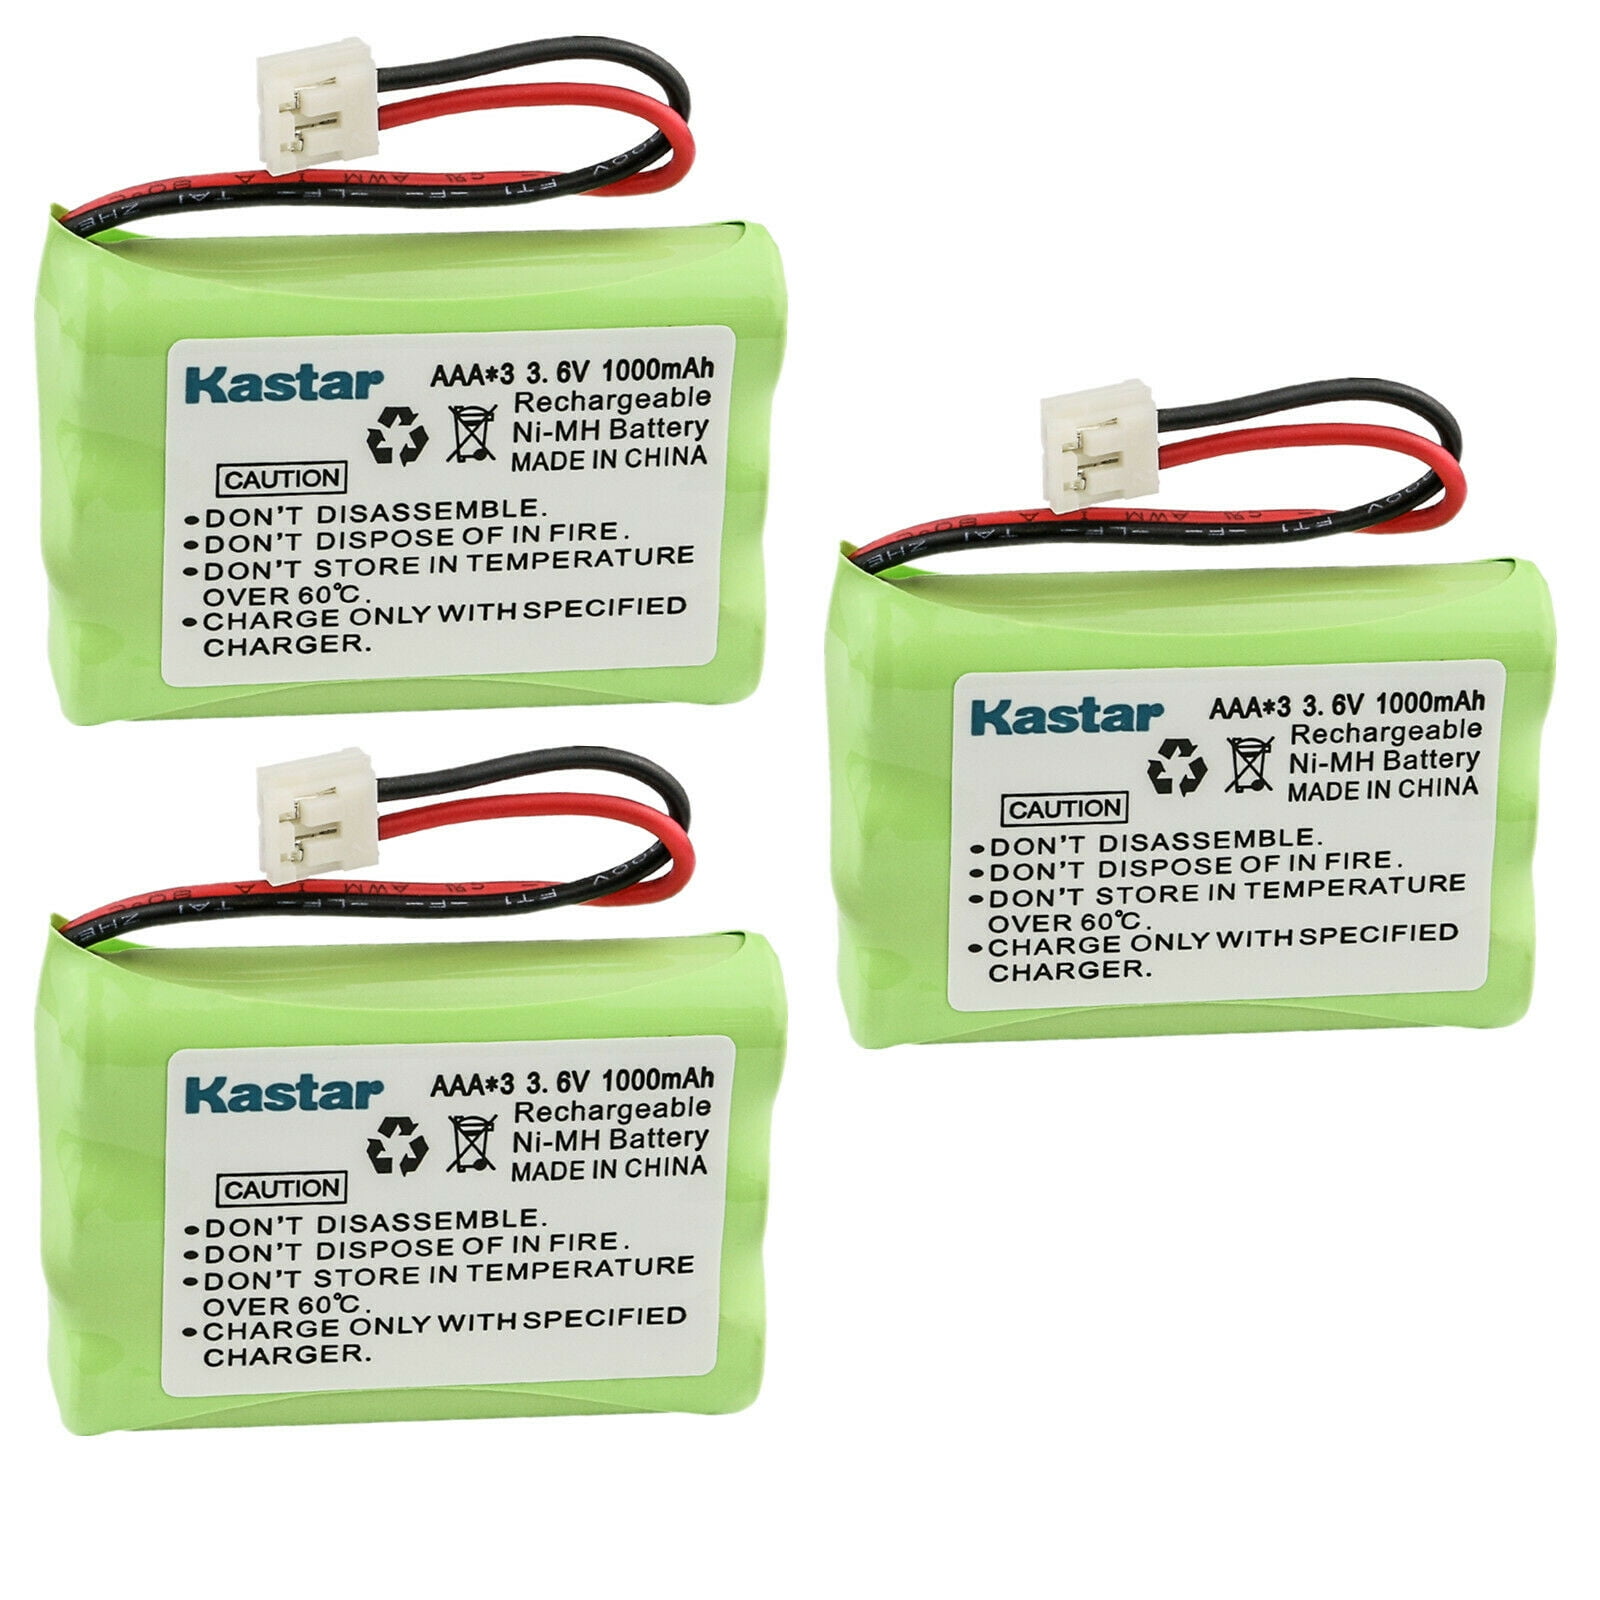 Kastar 4-Pack Battery Replacement for GE (General Electric) / Sanyo PC3F03  GES-PC3F03 TL96158 21009GE3 21018GE3 21028GE3 21098 21900 21905 25413 25414  25415 25802 25825 25826 25831GE3 25832GE3 25833 